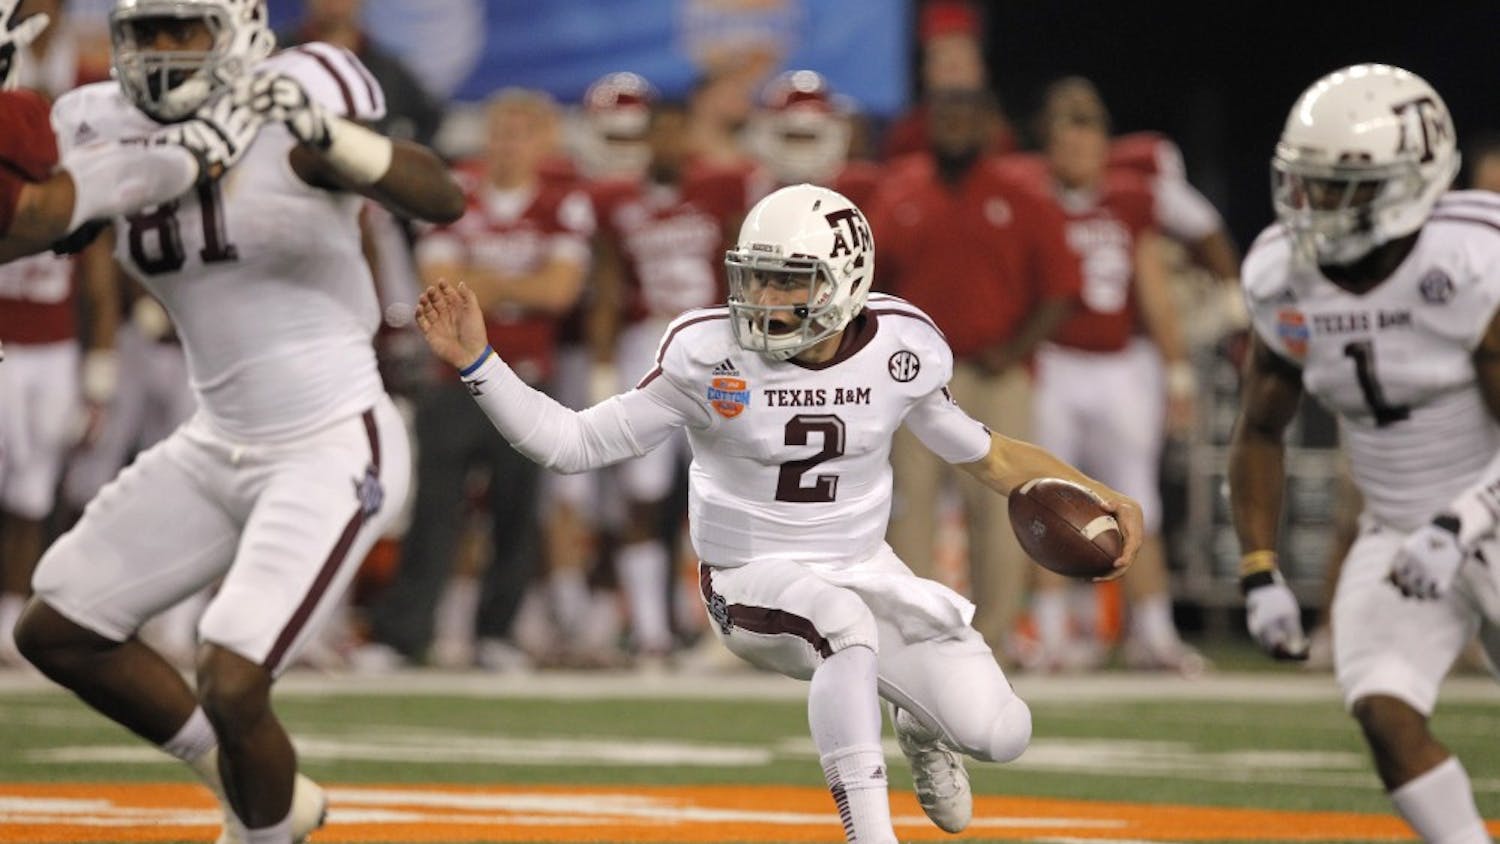 Texas A&amp;M quarterback Johnny Manziel (2) reverses course on a runs in the third quarter against Oklahoma in the AT&amp;T Cotton Bowl game in Cowboys Stadium in Arlington, Texas, on Friday, January 4, 2013. Texas A&amp;M dispatched the Sooners, 41-13. (Rodger Mallison/Fort Worth Star-Telegram/MCT)